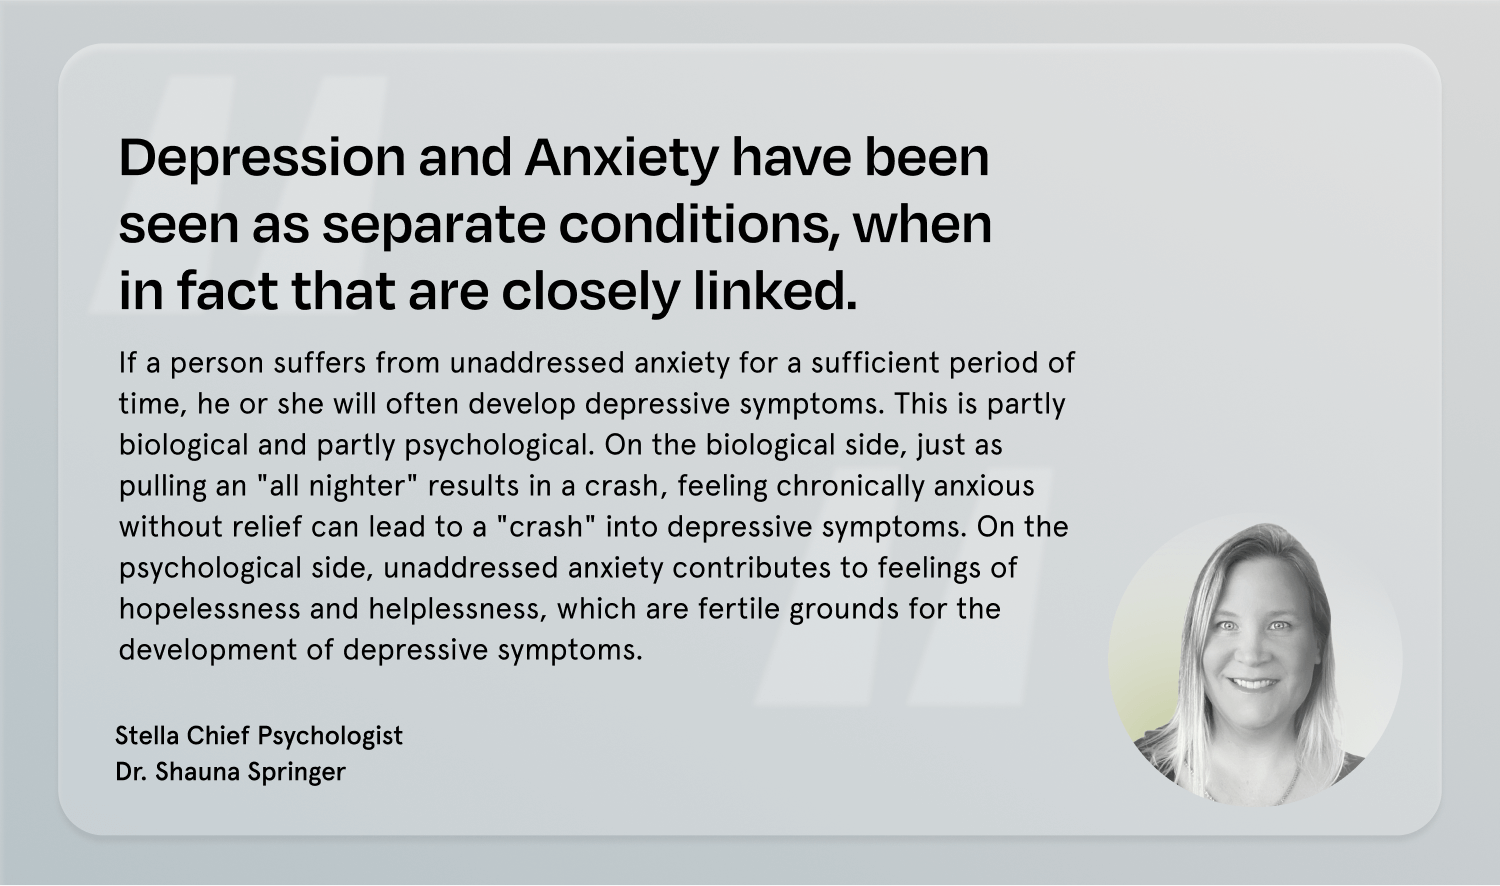 Depression and anxiety have been seen as separate conditions when in fact that are closely linked